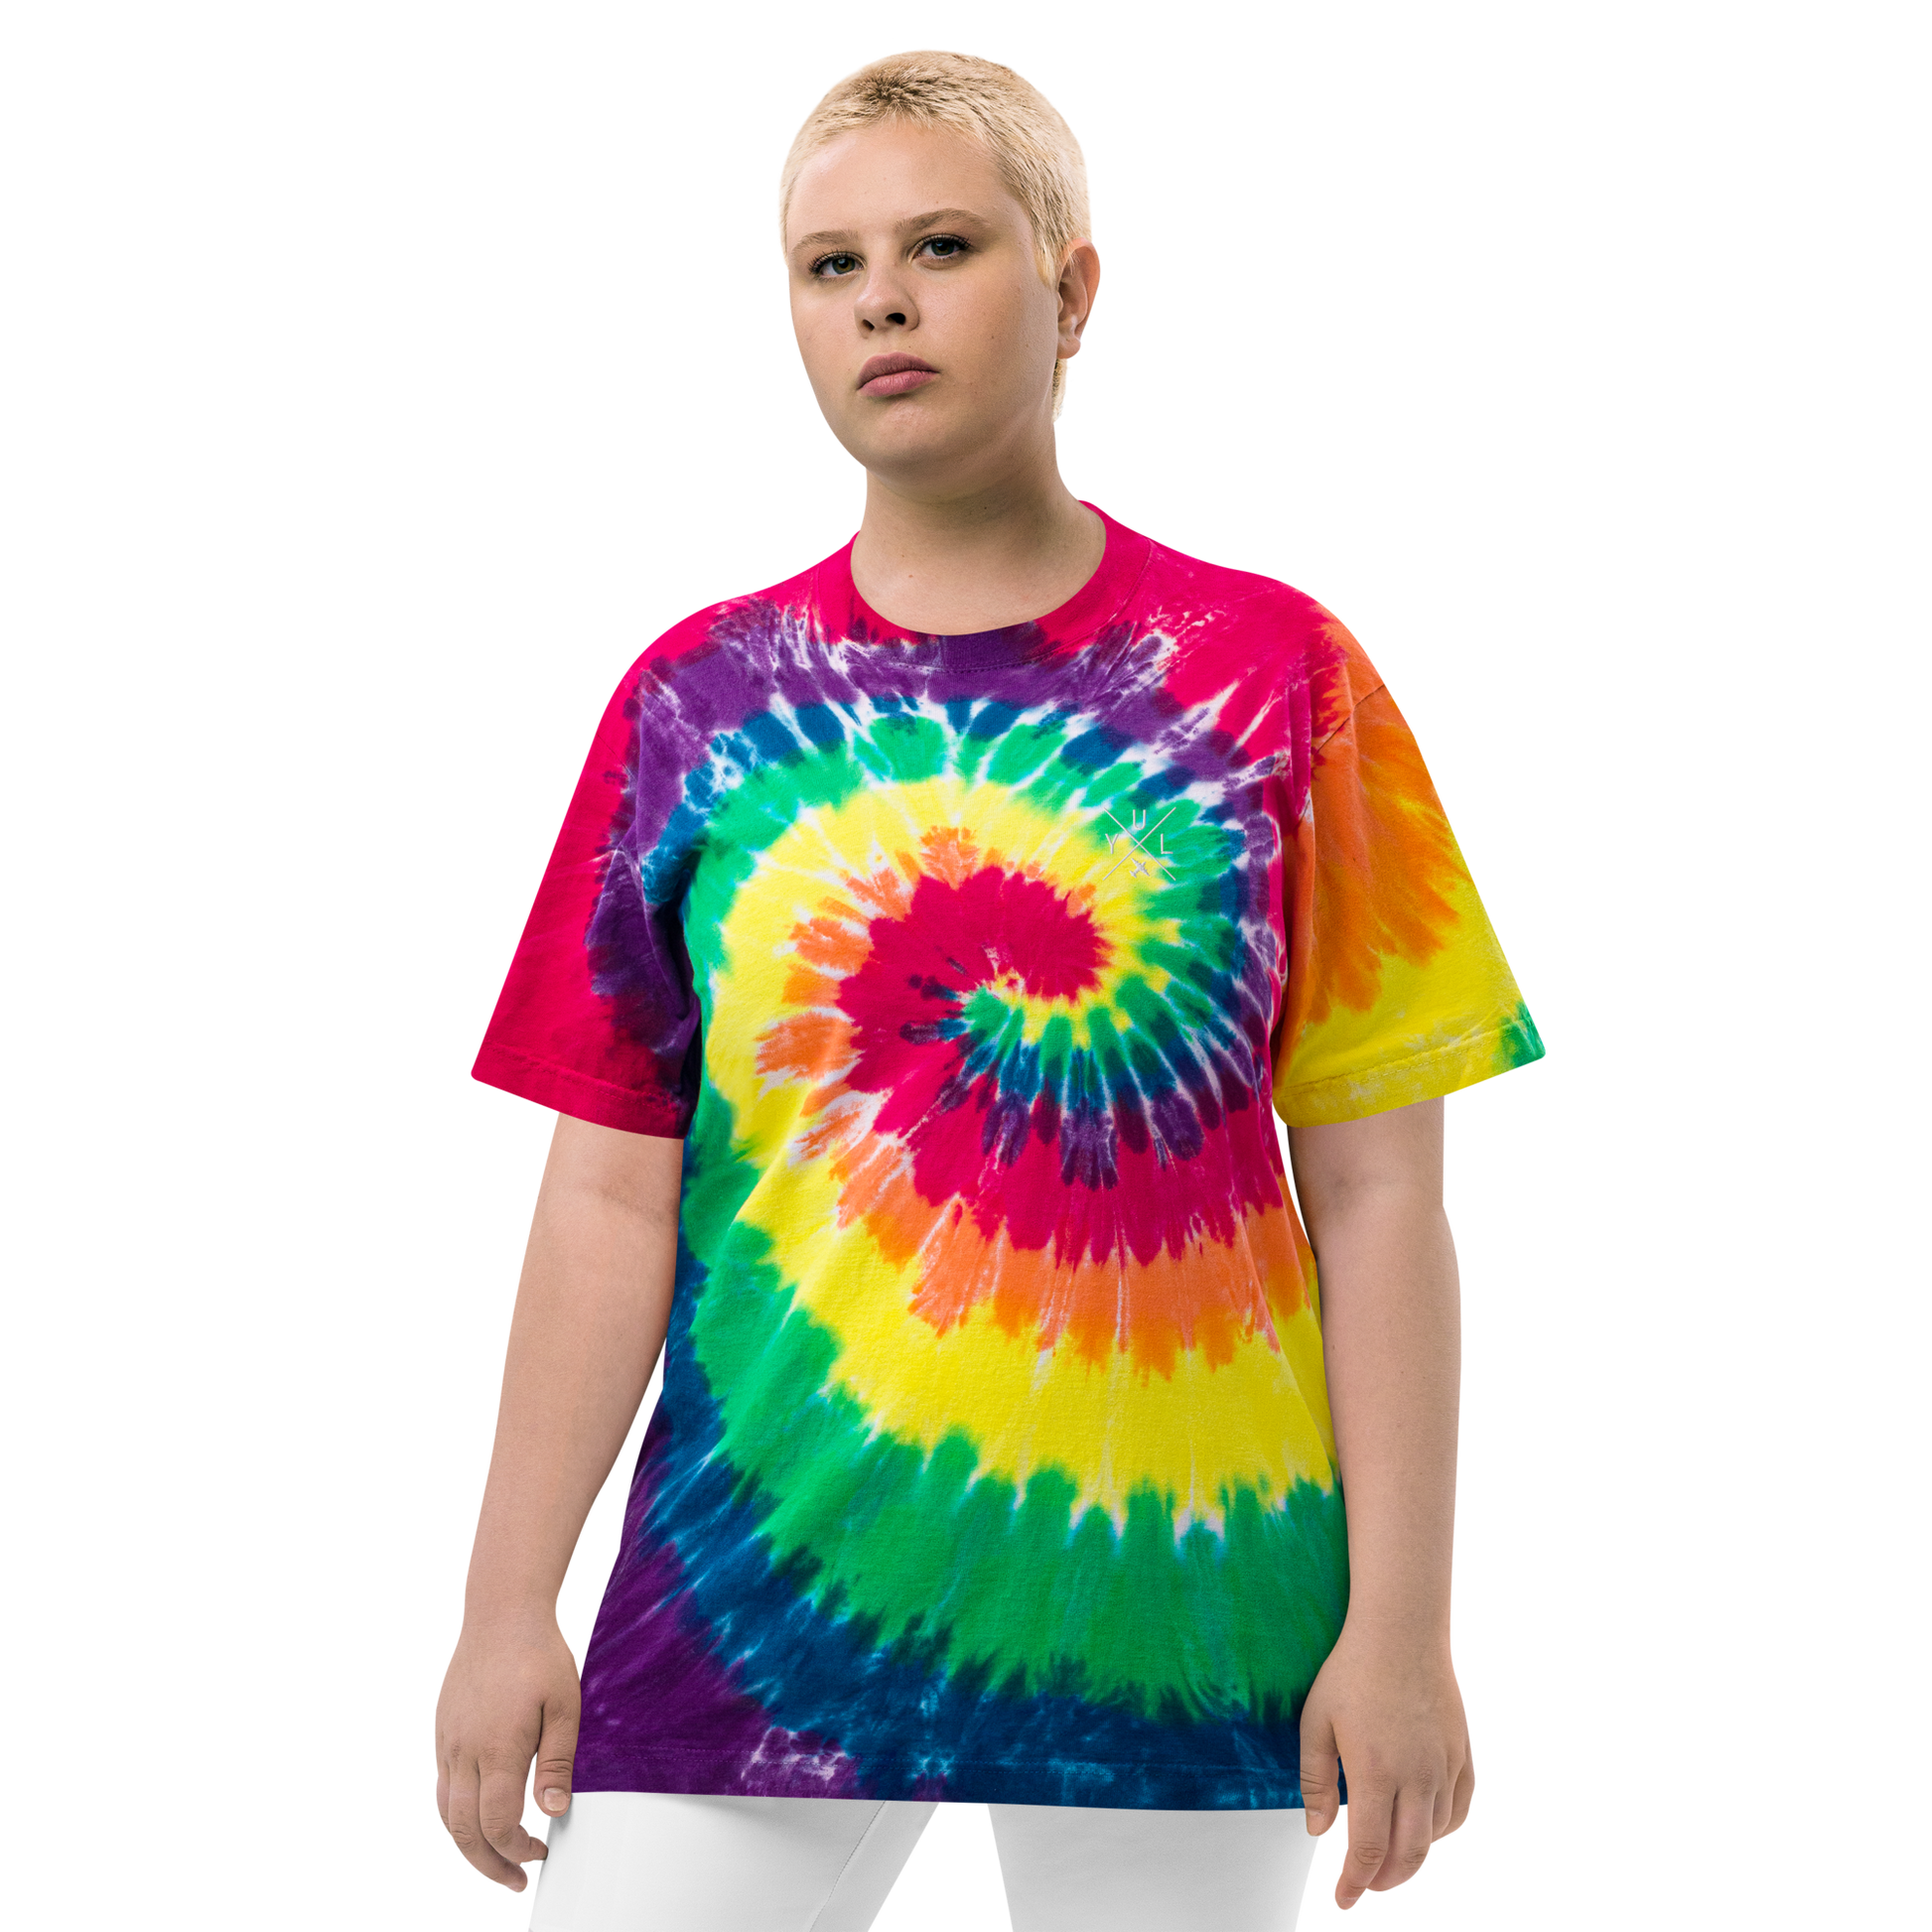 YHM Designs - YUL Montreal Oversized Tie-Dye T-Shirt - Crossed-X Design with Airport Code and Vintage Propliner - White Embroidery - Image 01